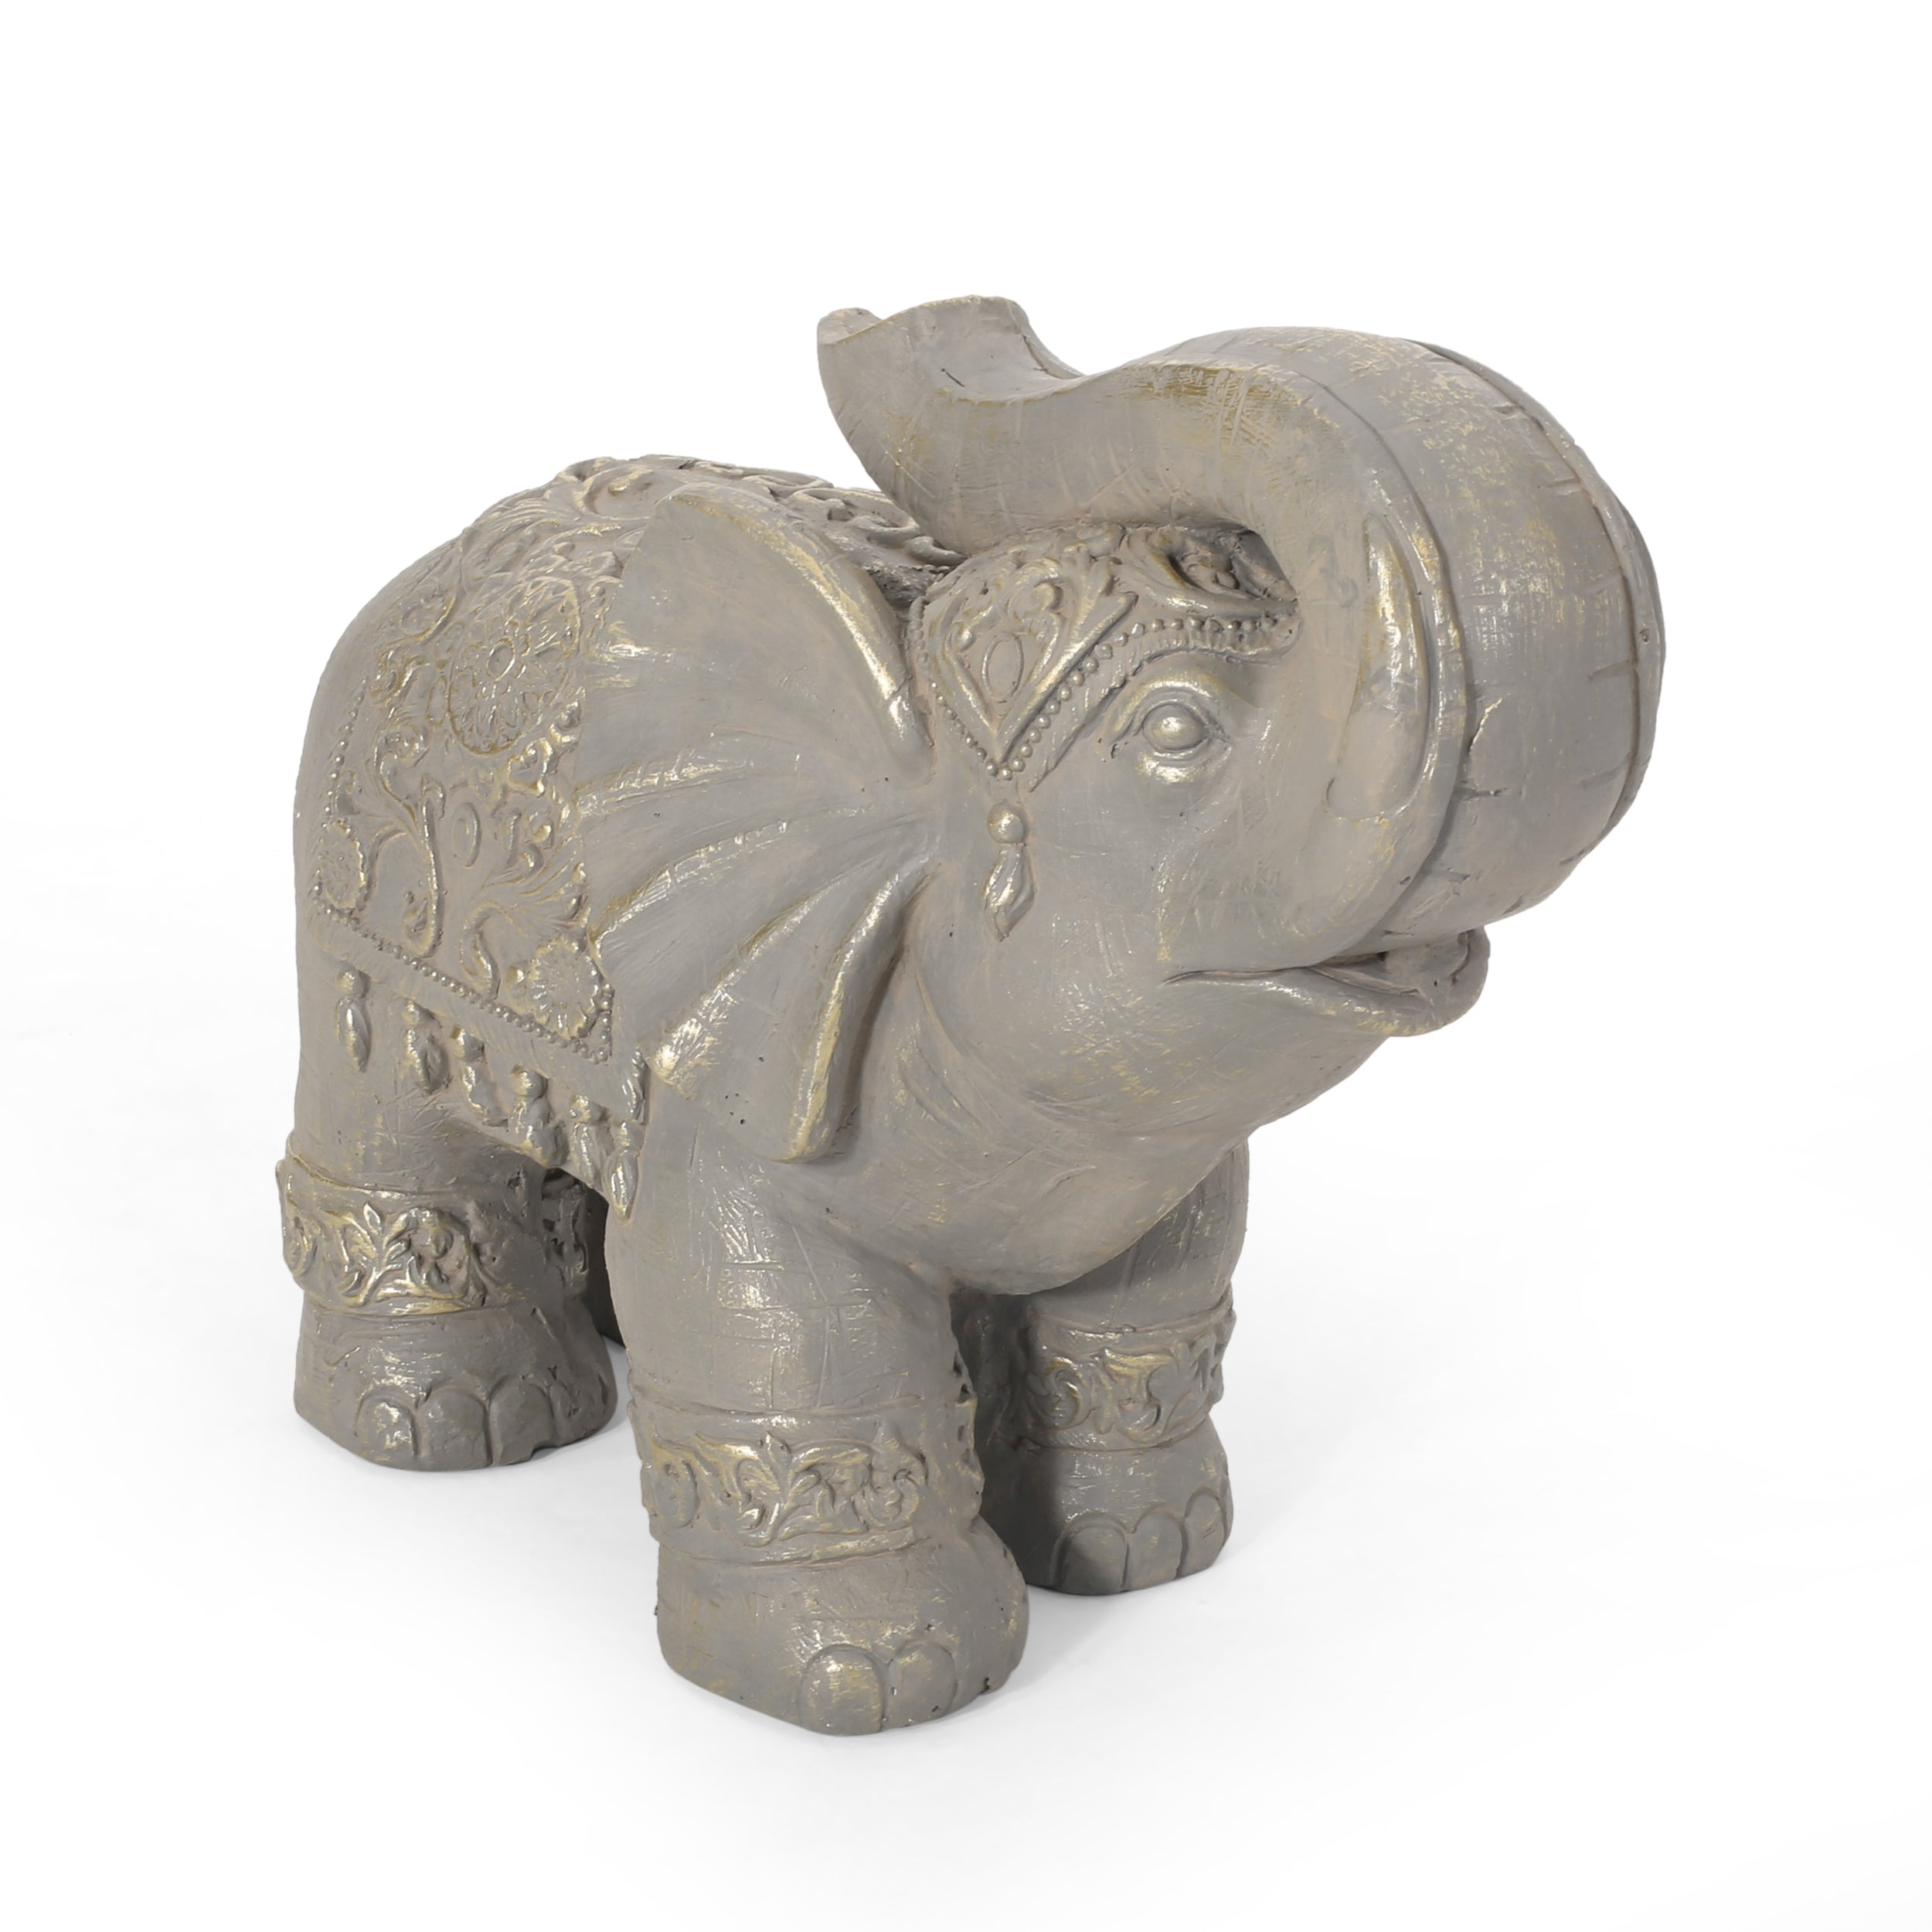 Pierpont Outdoor Elephant Garden Statue, Gray and Gold – GDFStudio